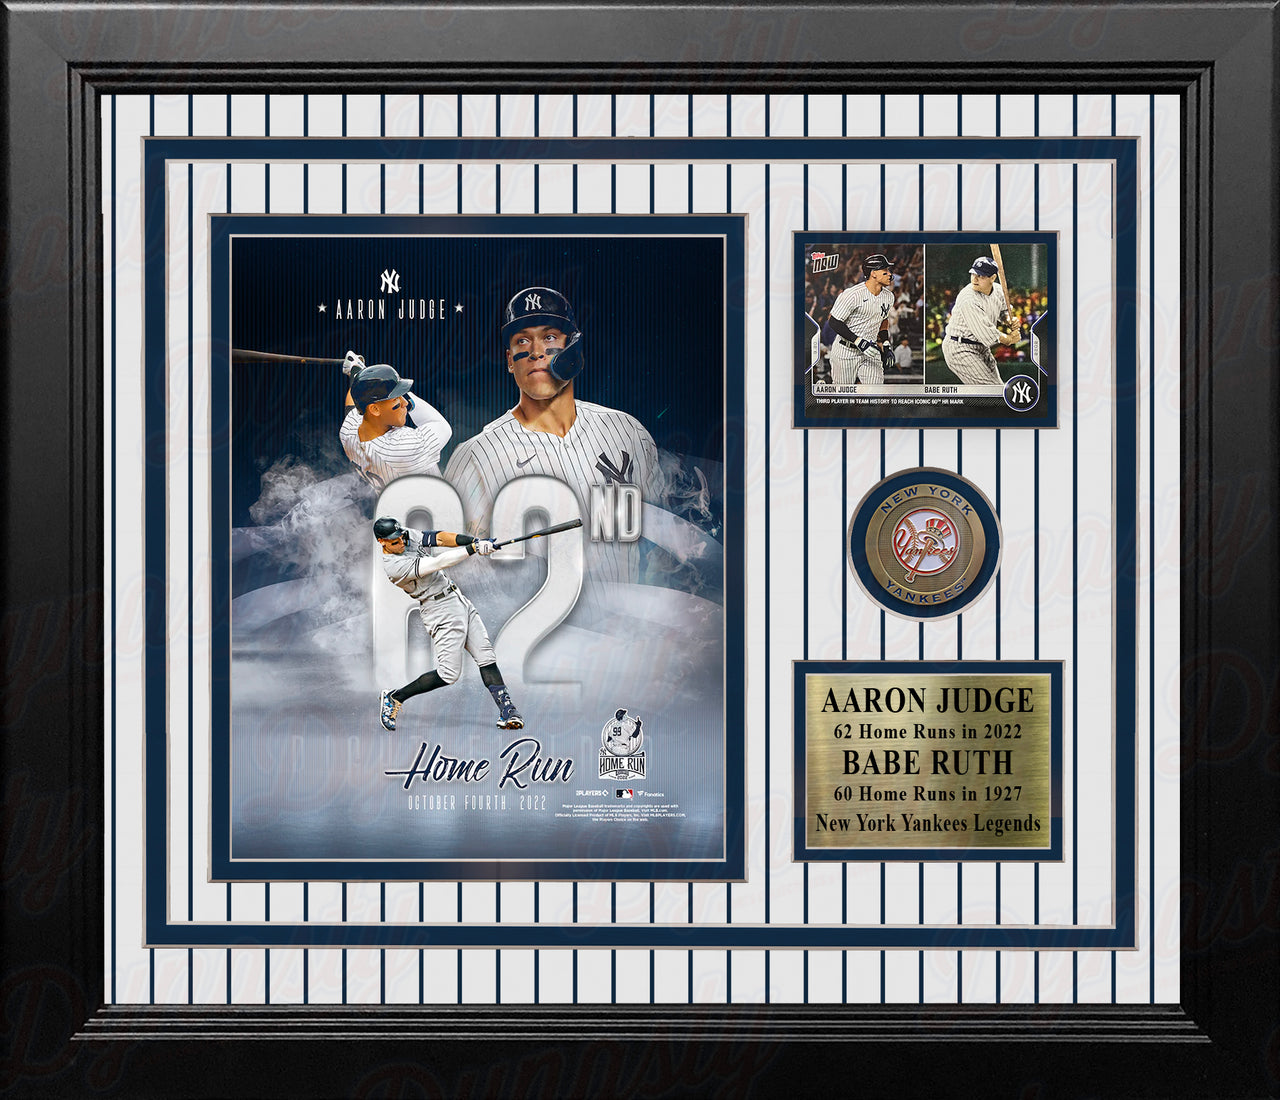 Aaron Judge 62nd Home Run New York Yankees 8" x 10" Framed Collage Photo with Dual Babe Ruth Card - Dynasty Sports & Framing 